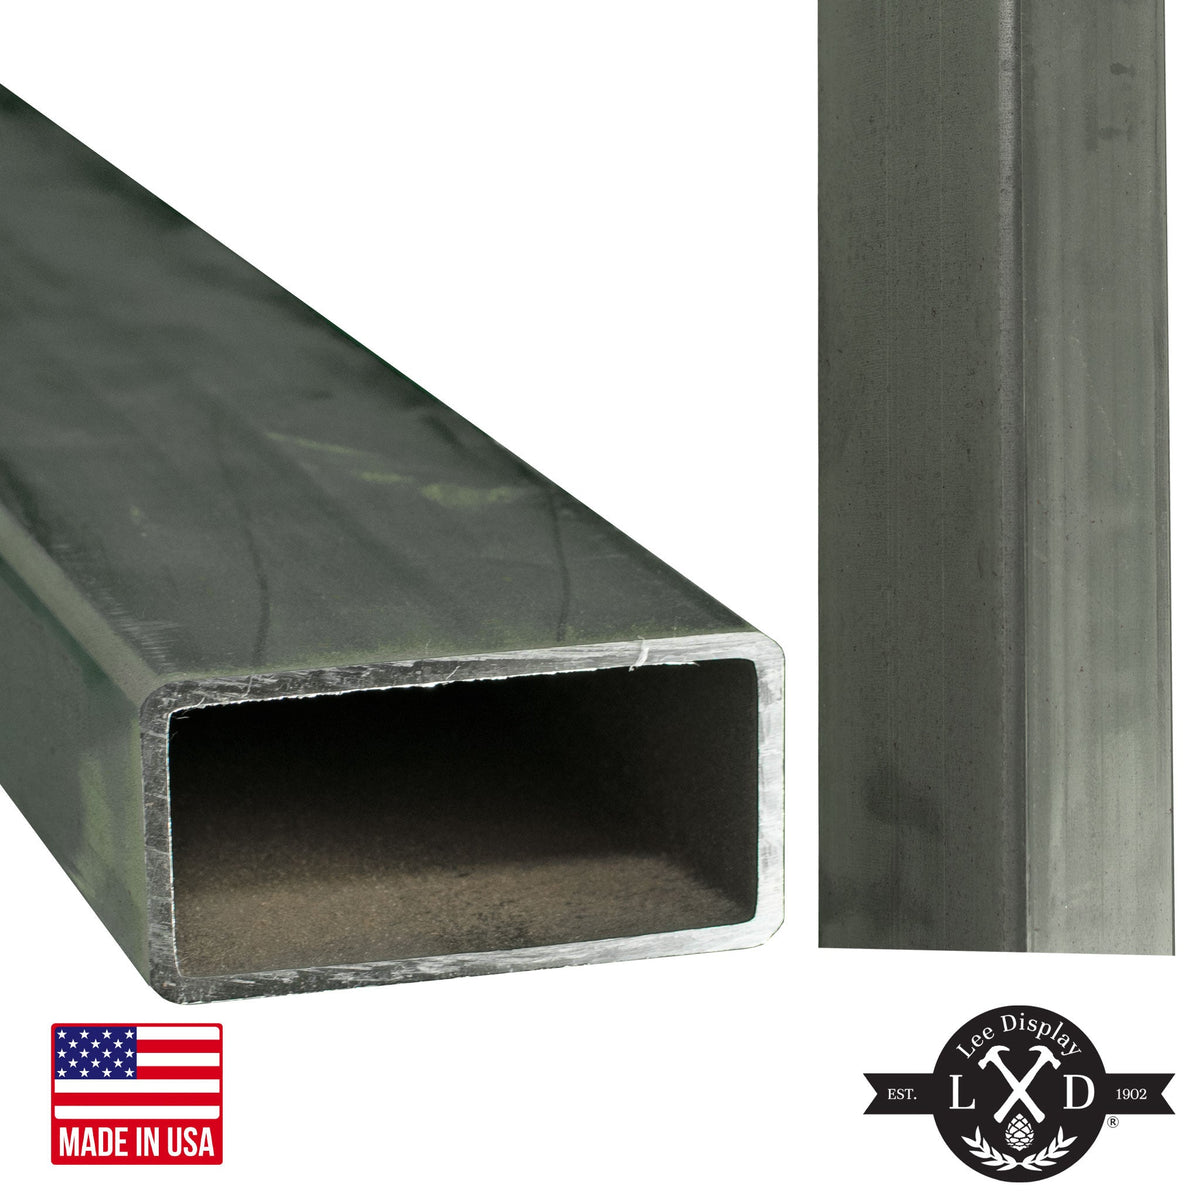 American made Rectangular Steel Tubing on sale at leedisplay.com in varying sizes and lengths